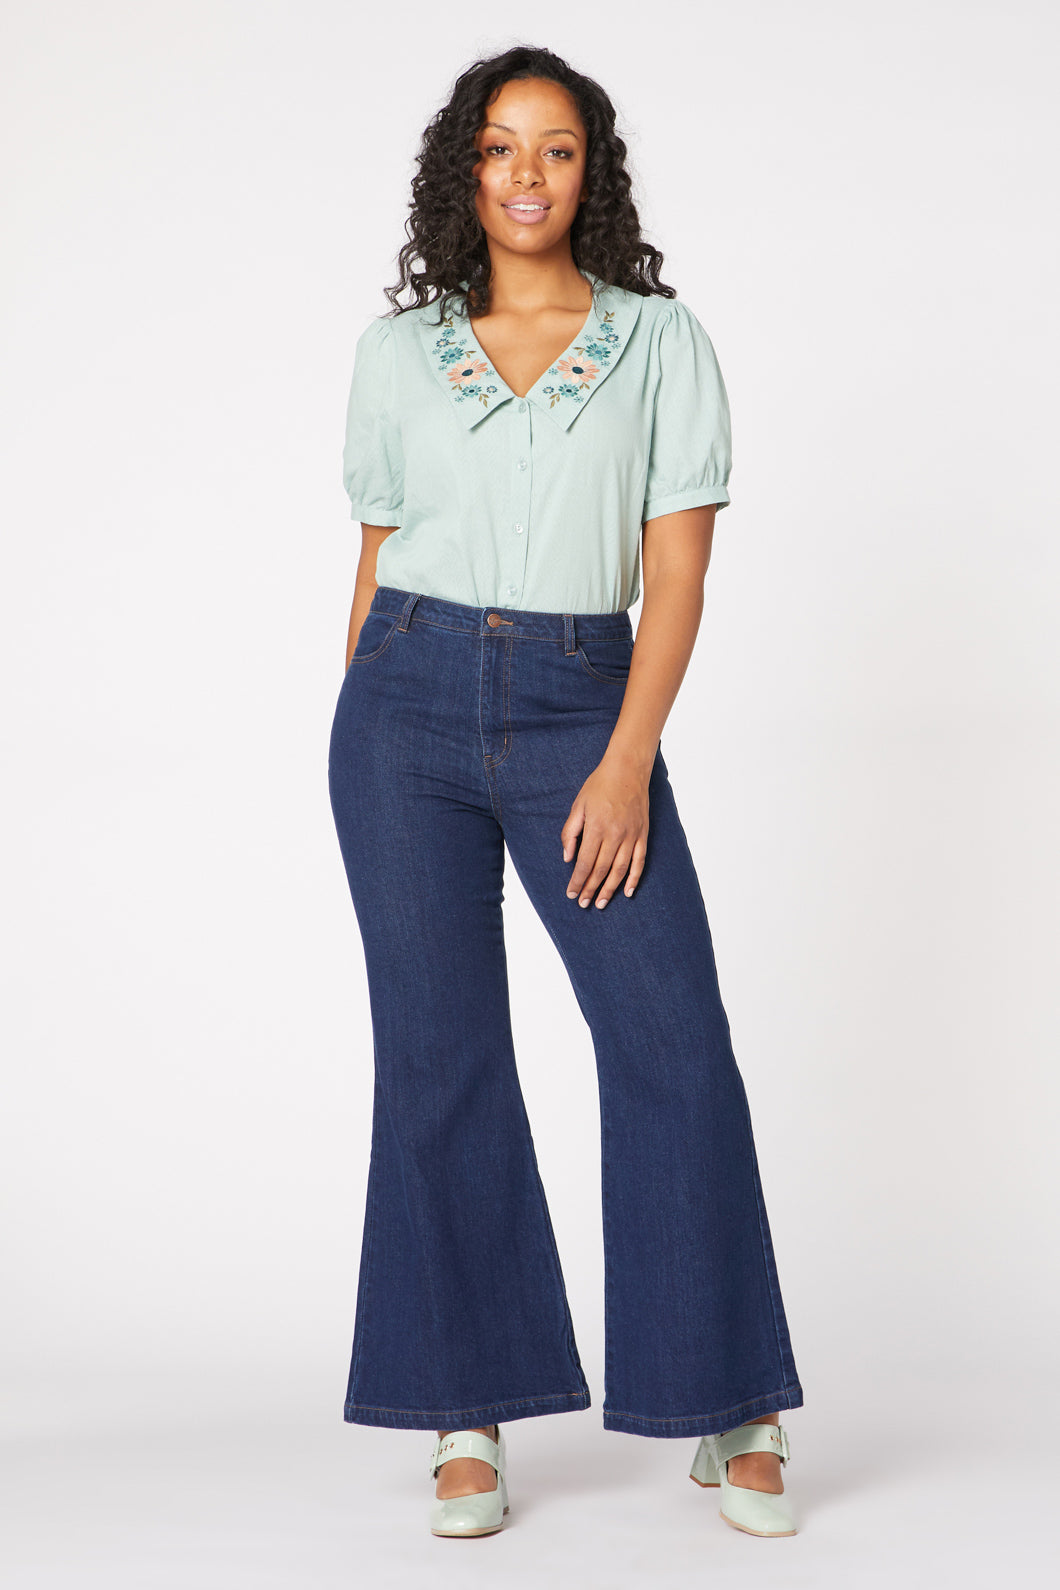 Pin di High Waisted Jeans